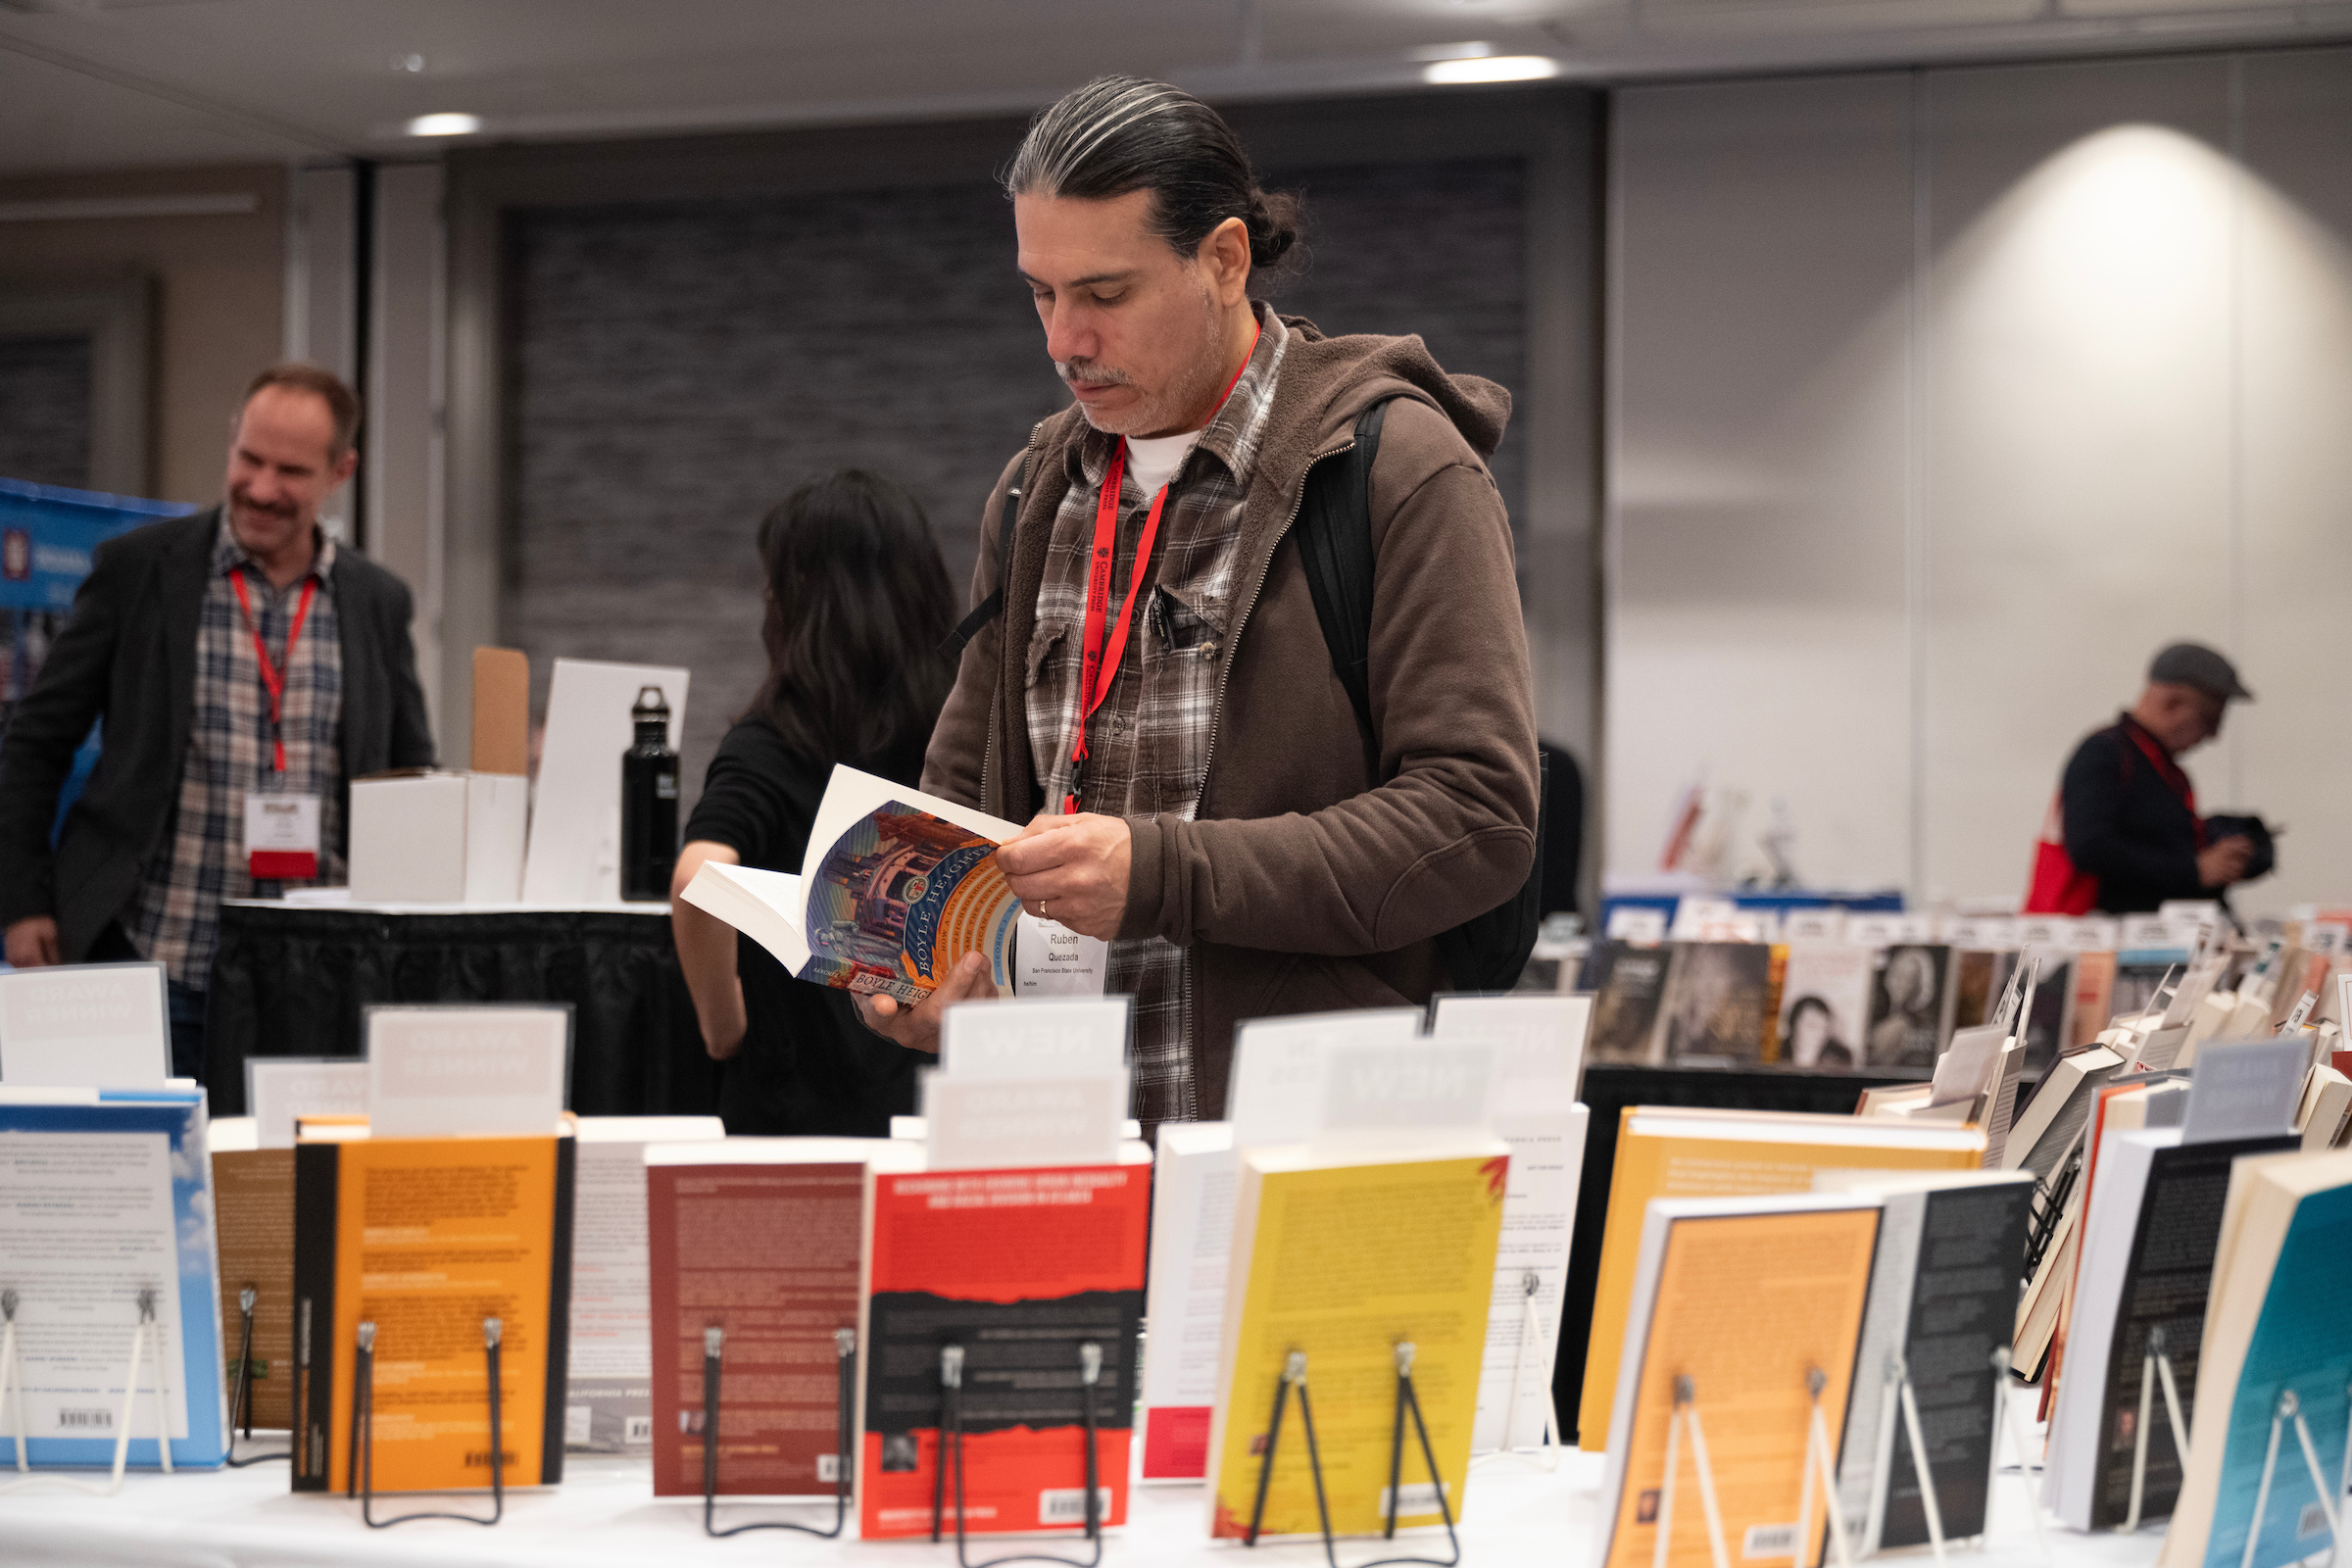 A man holding a book open in front of a booth with lots of books on display